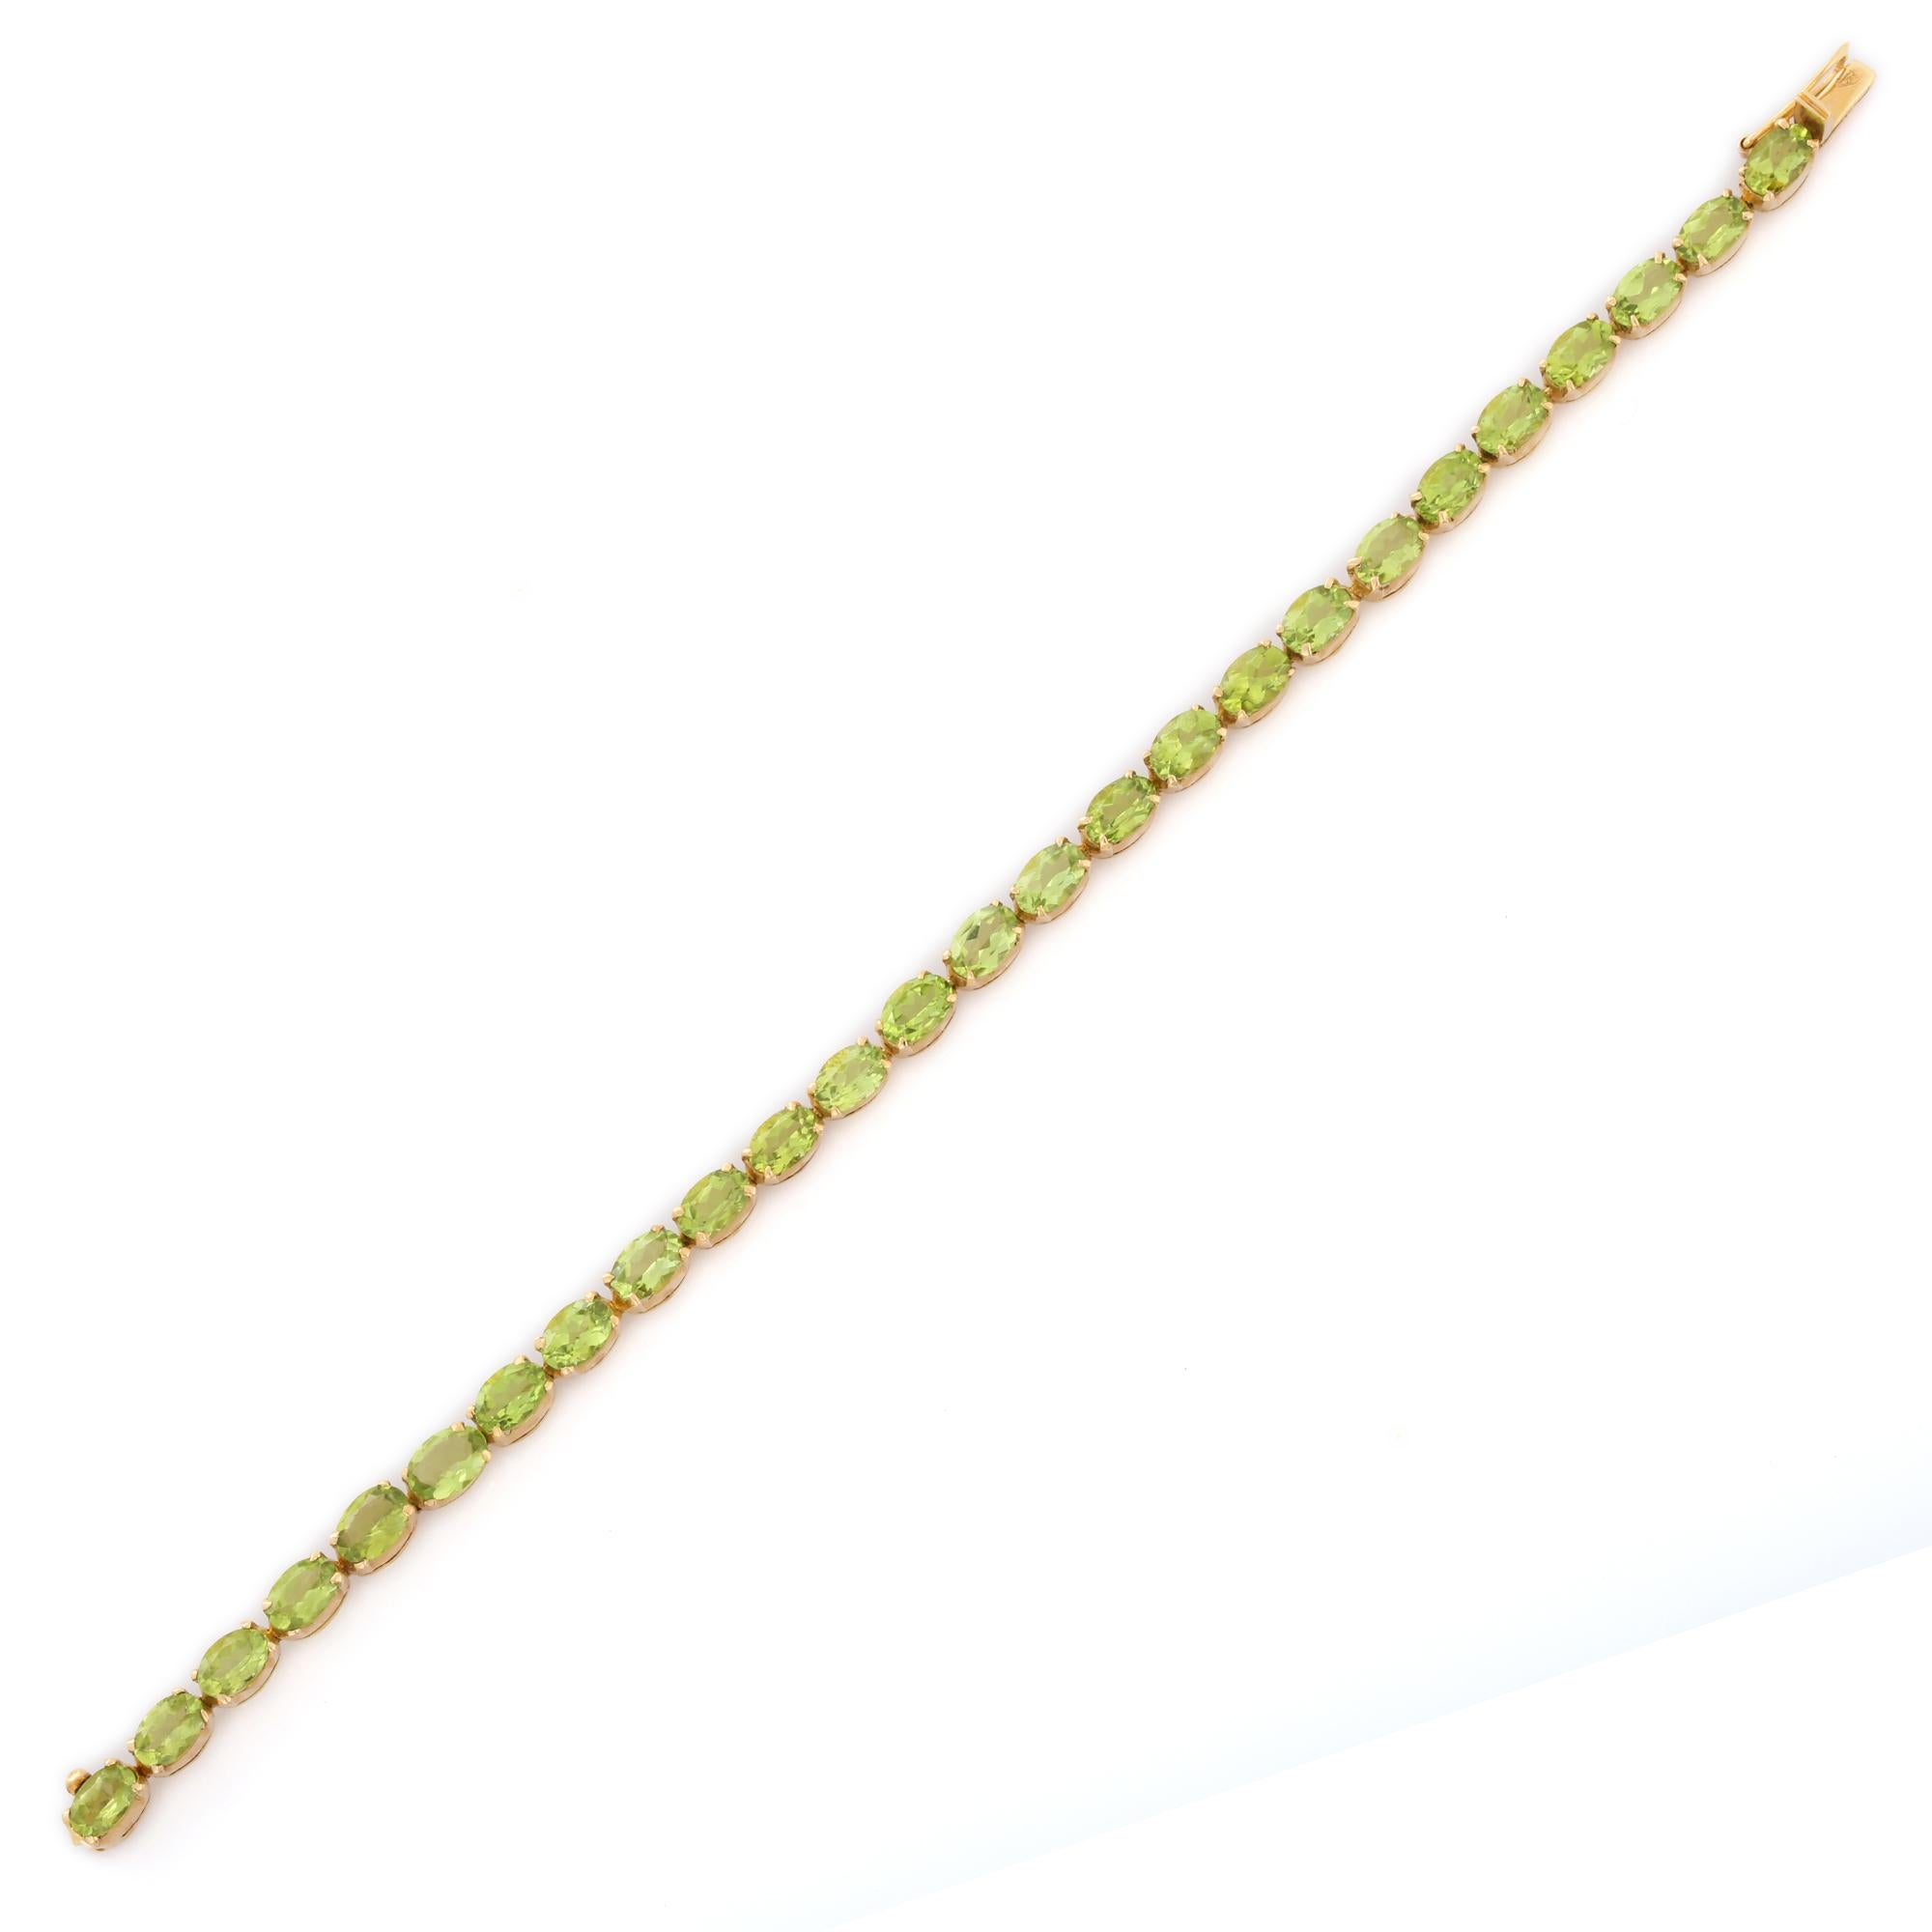 This Peridot Tennis Bracelet in 18K gold showcases 26 endlessly sparkling natural peridot, weighing 18.5 carats. It measures 7.25 inches long in length. 
Peridot attracts love and calms anger by giving renewal to all things.
Designed with perfect